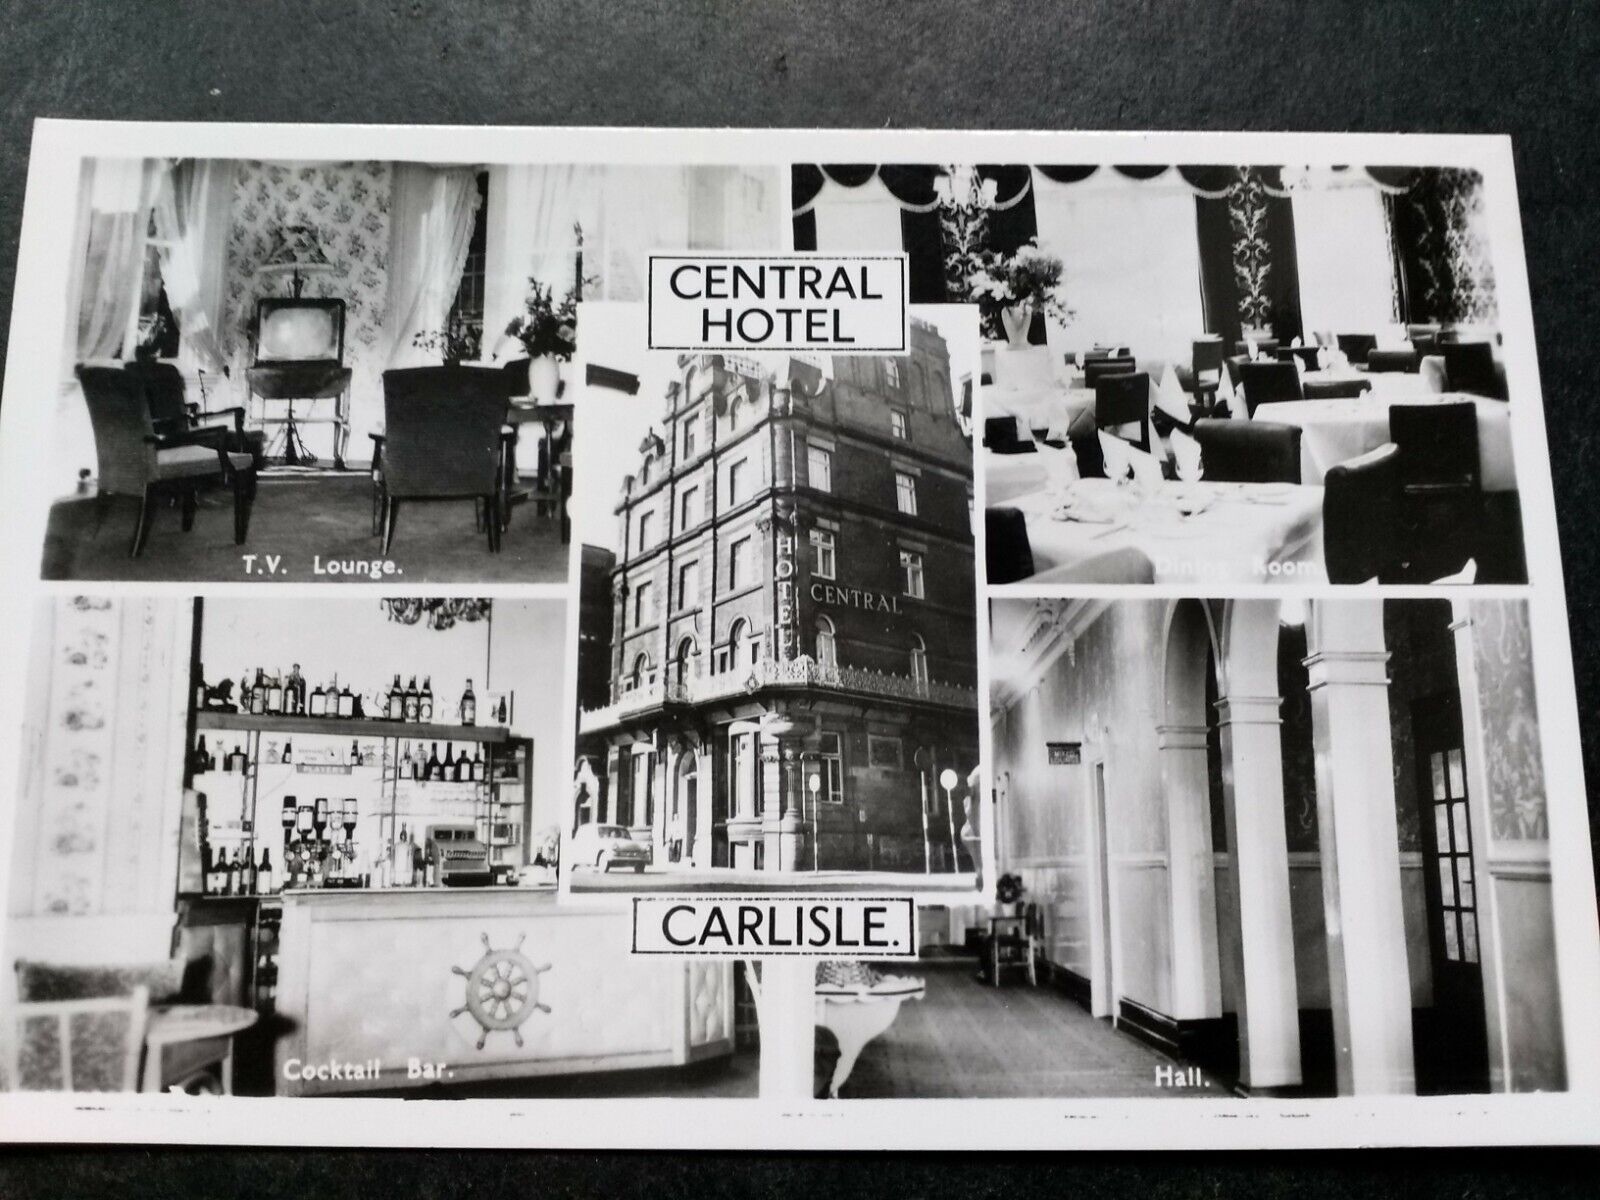 House Clearance - Carlisle, Cumbria, Vintage 1960s real photo service, The Central Hotel.